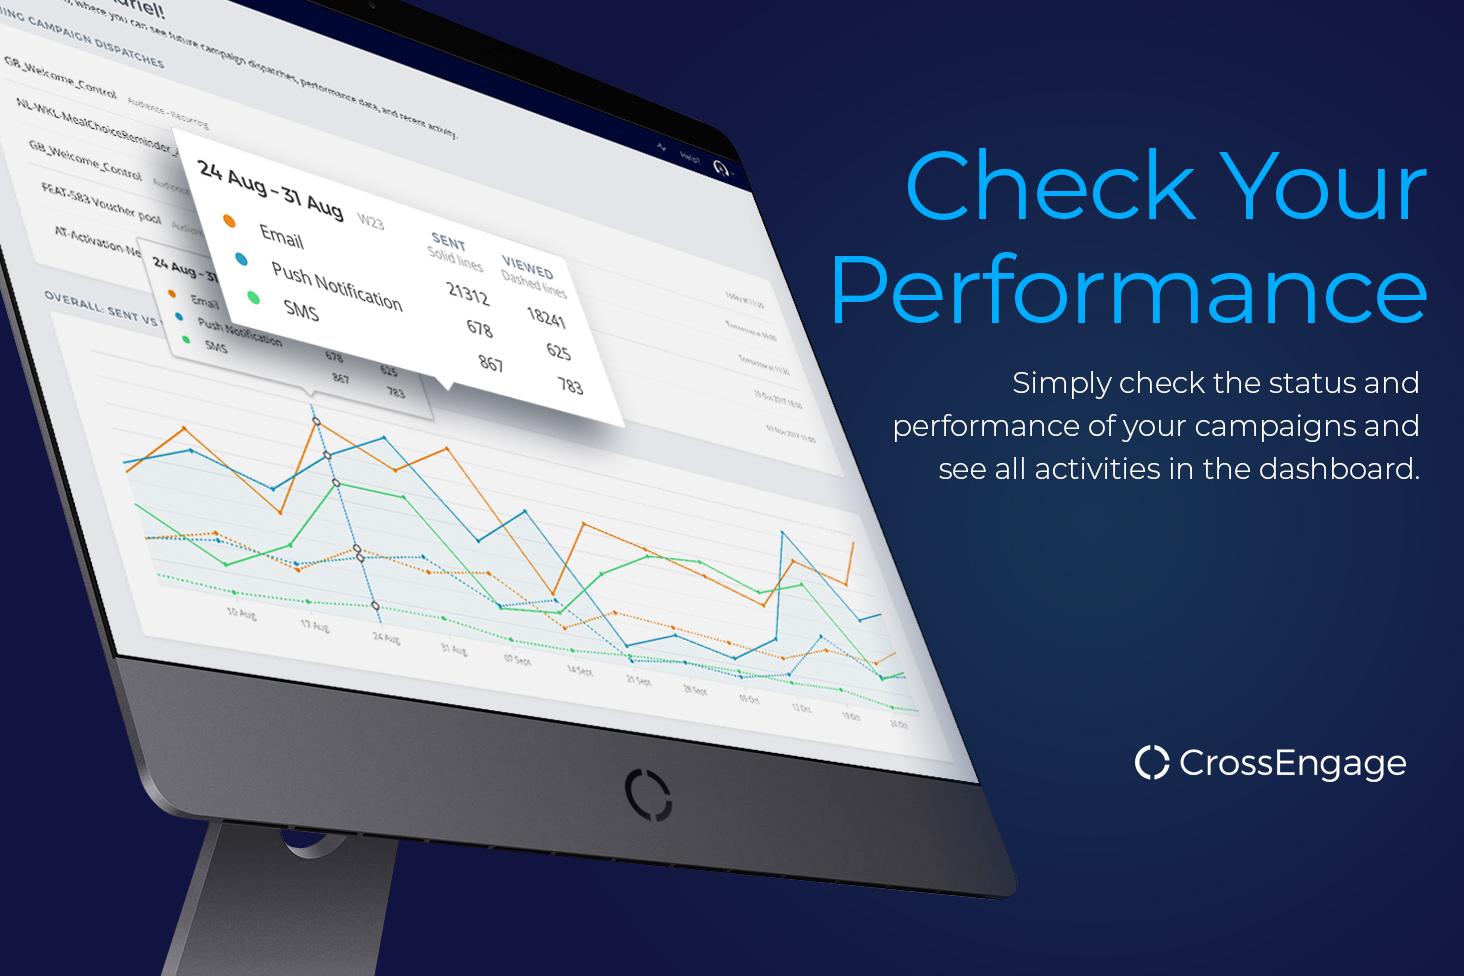 CrossEngage - Check Your Performance